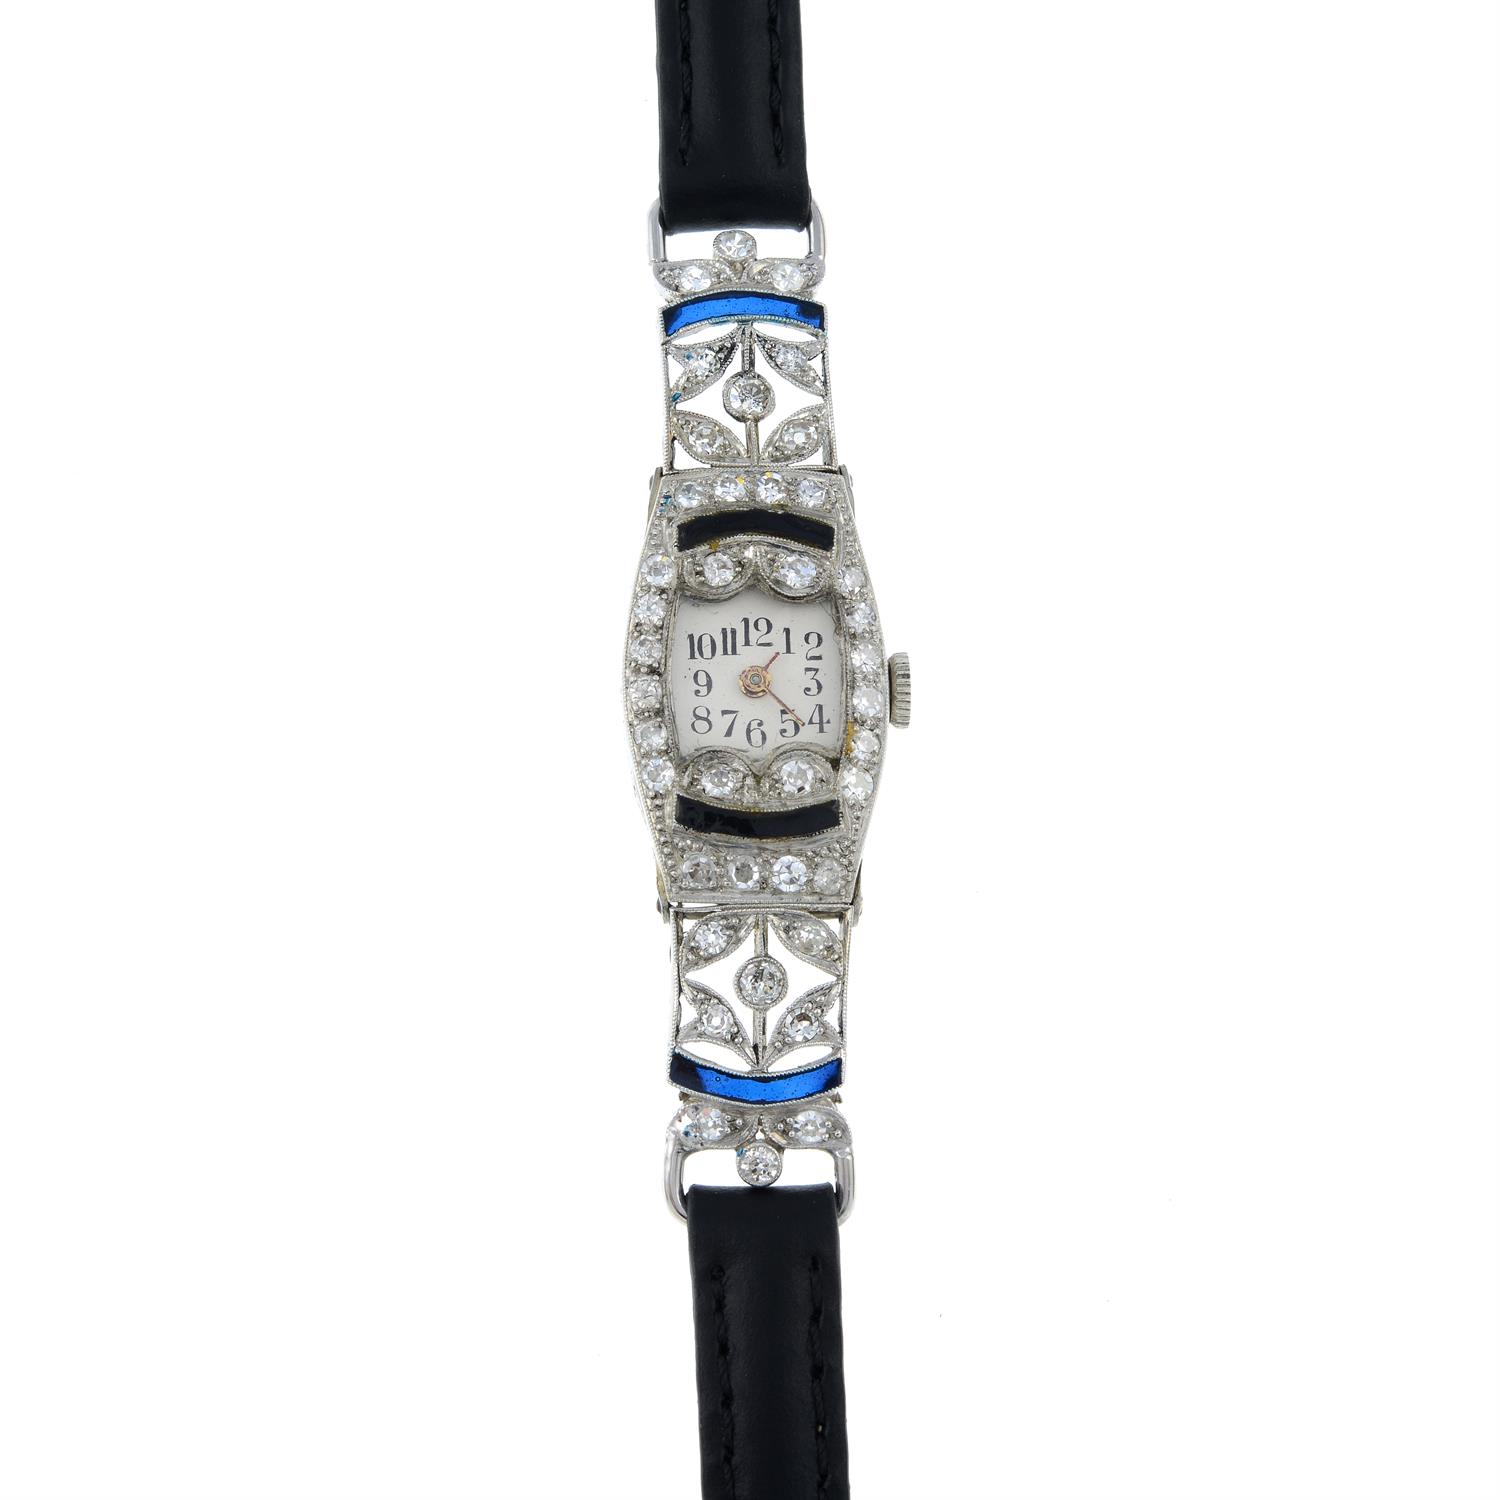 A mid 20th century platinum enamel and diamond cocktail watch, with later leather strap.